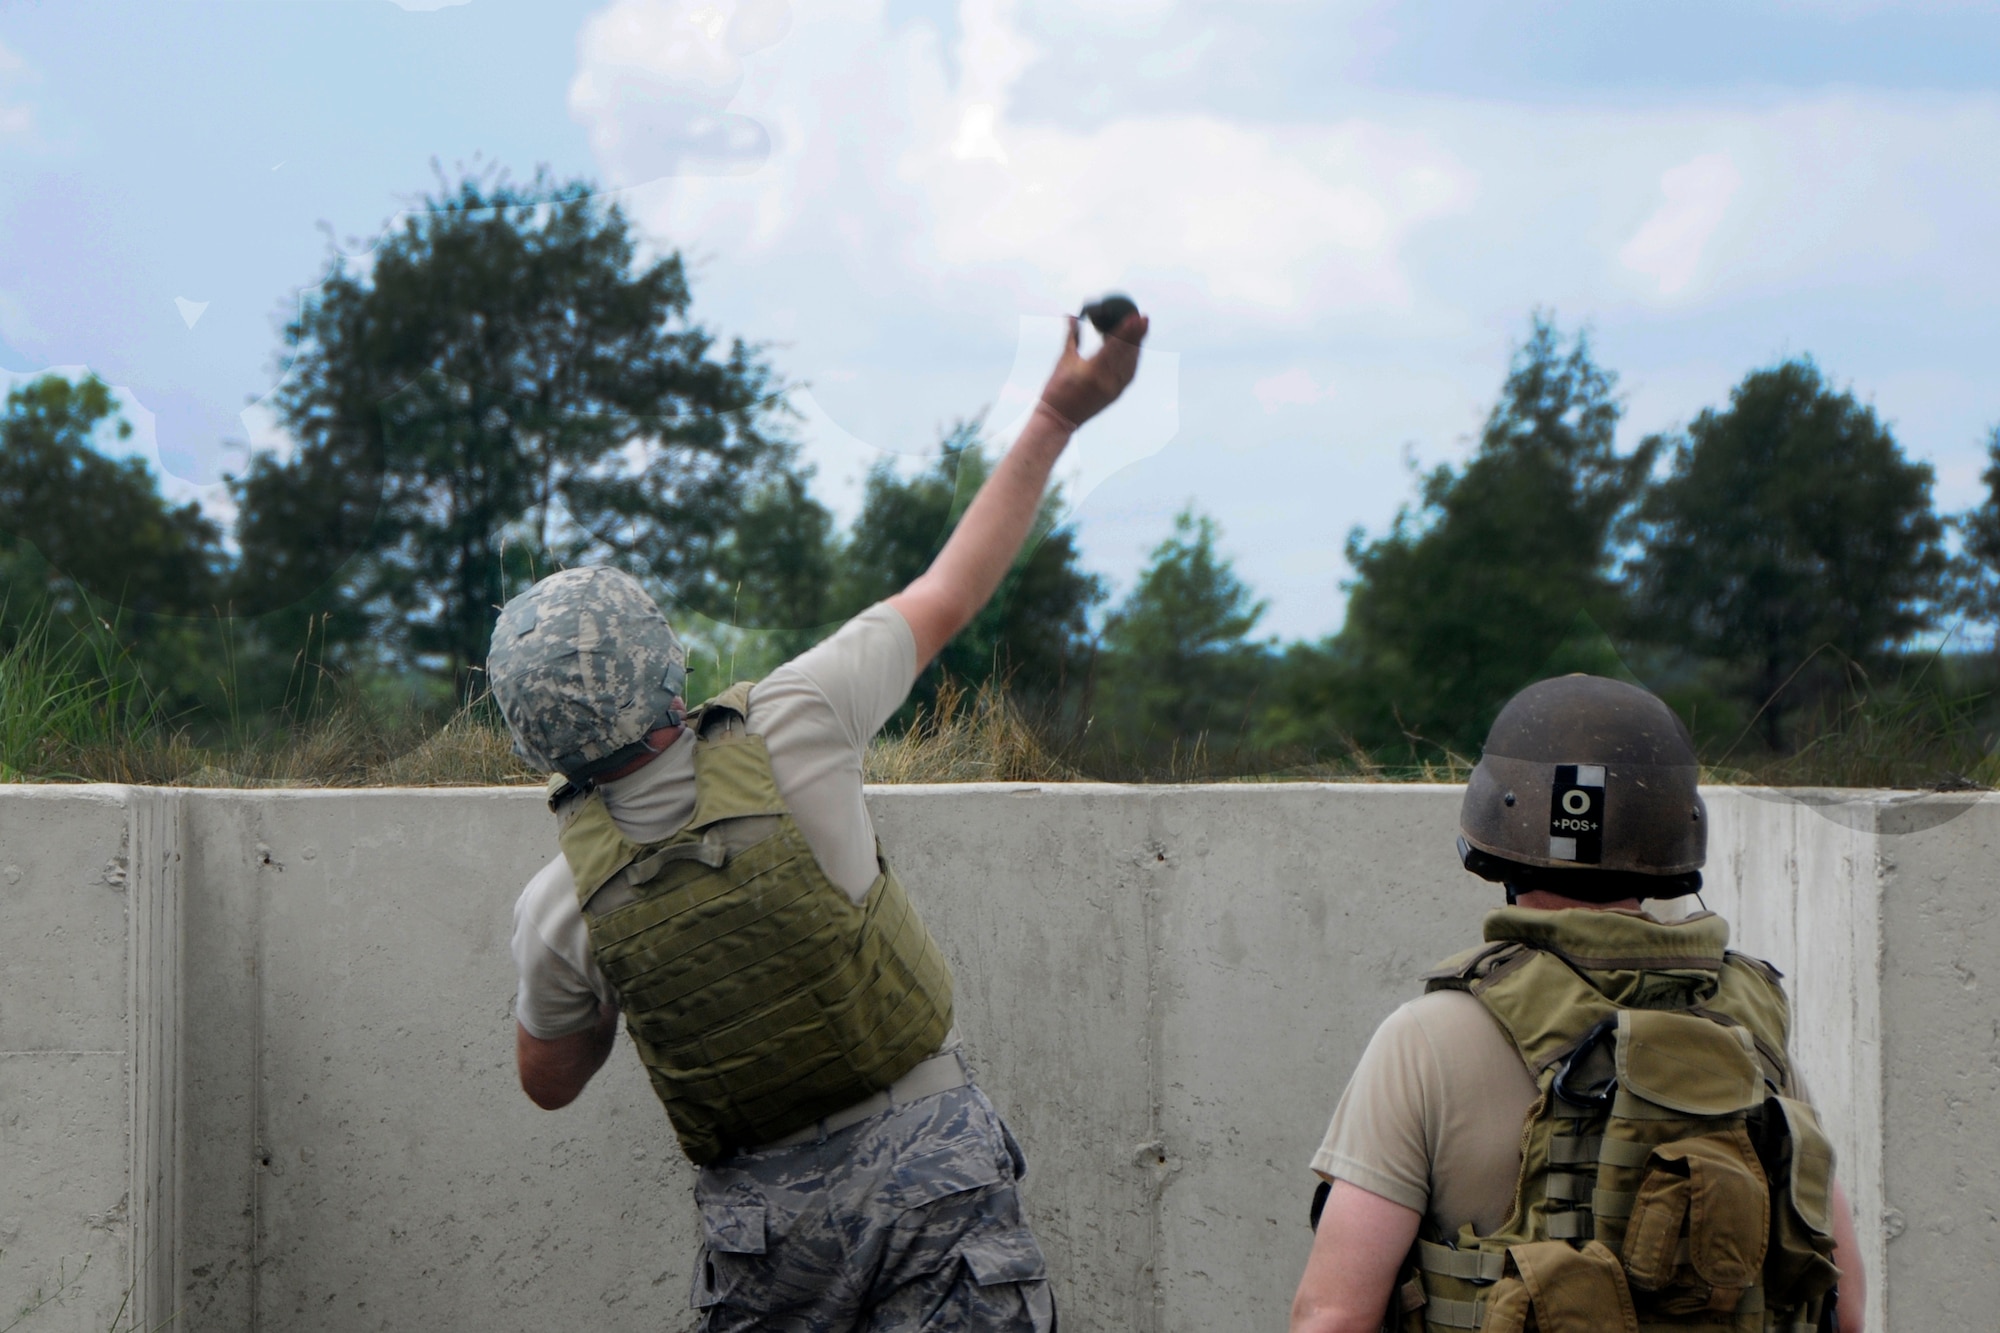 Master Sgt. Craig Cross from Selfridge Air National Guard Base, 127th Operational Support Flight, releases an M67 grenade at Camp Grayling Maneuver Training Center, Mich., during the annual Gray Wolverine training exercise, July 23, 2011. Cross came to support the 107th Weather Flight on their Gray Wolverine training as an instructor of Meteorological Weather Forecasting.  (U.S. Air Force photo by TSgt David Kujawa)